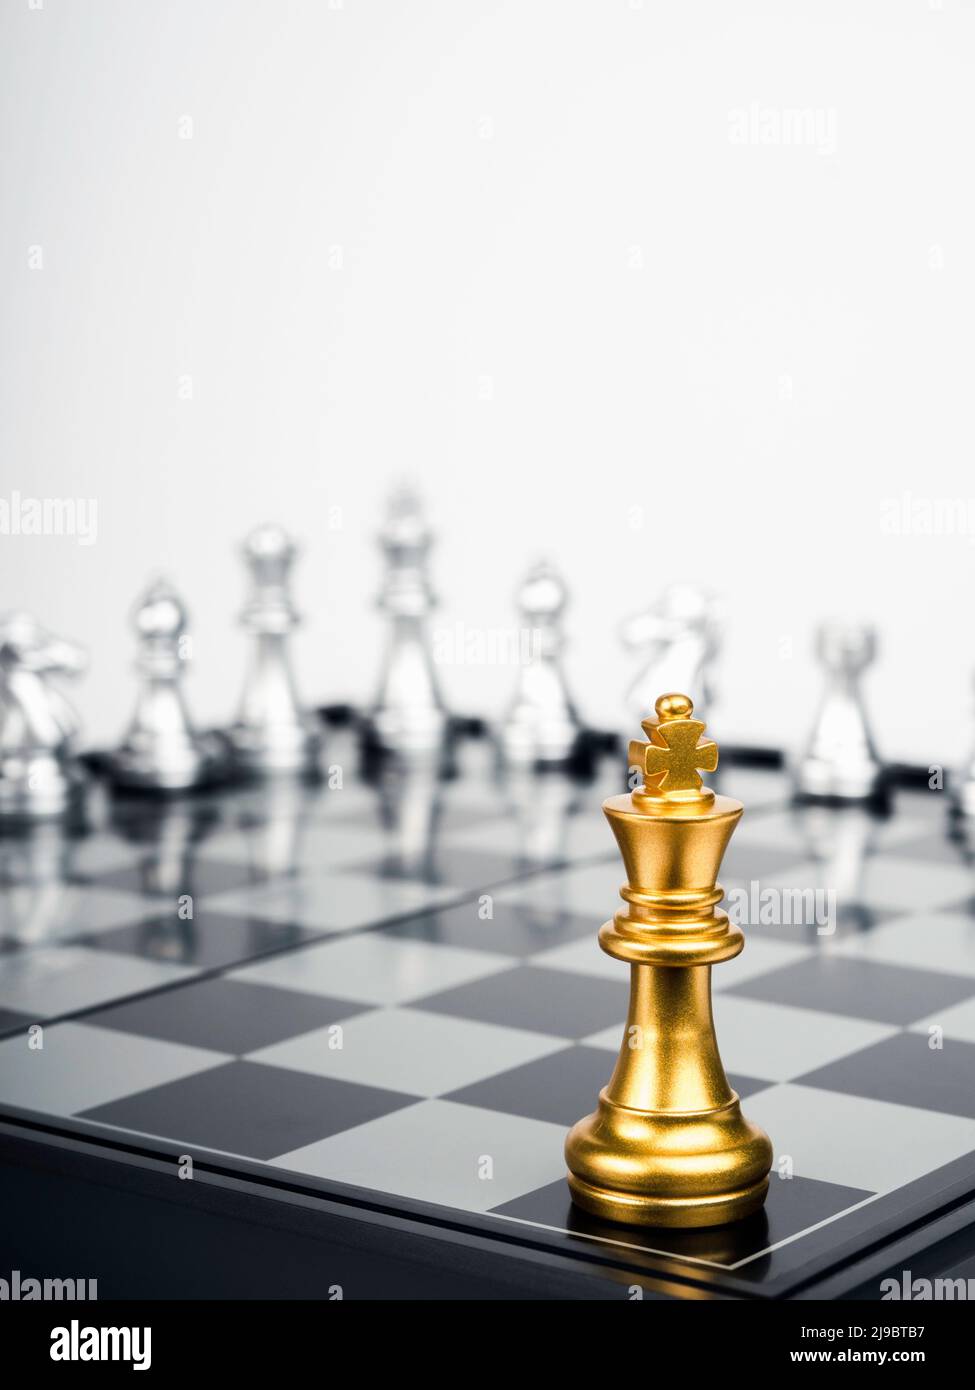 The Golden king chess piece standing on chessboard corner in front of silver chess pieces on white background, vertical. Leadership, fighter, competit Stock Photo